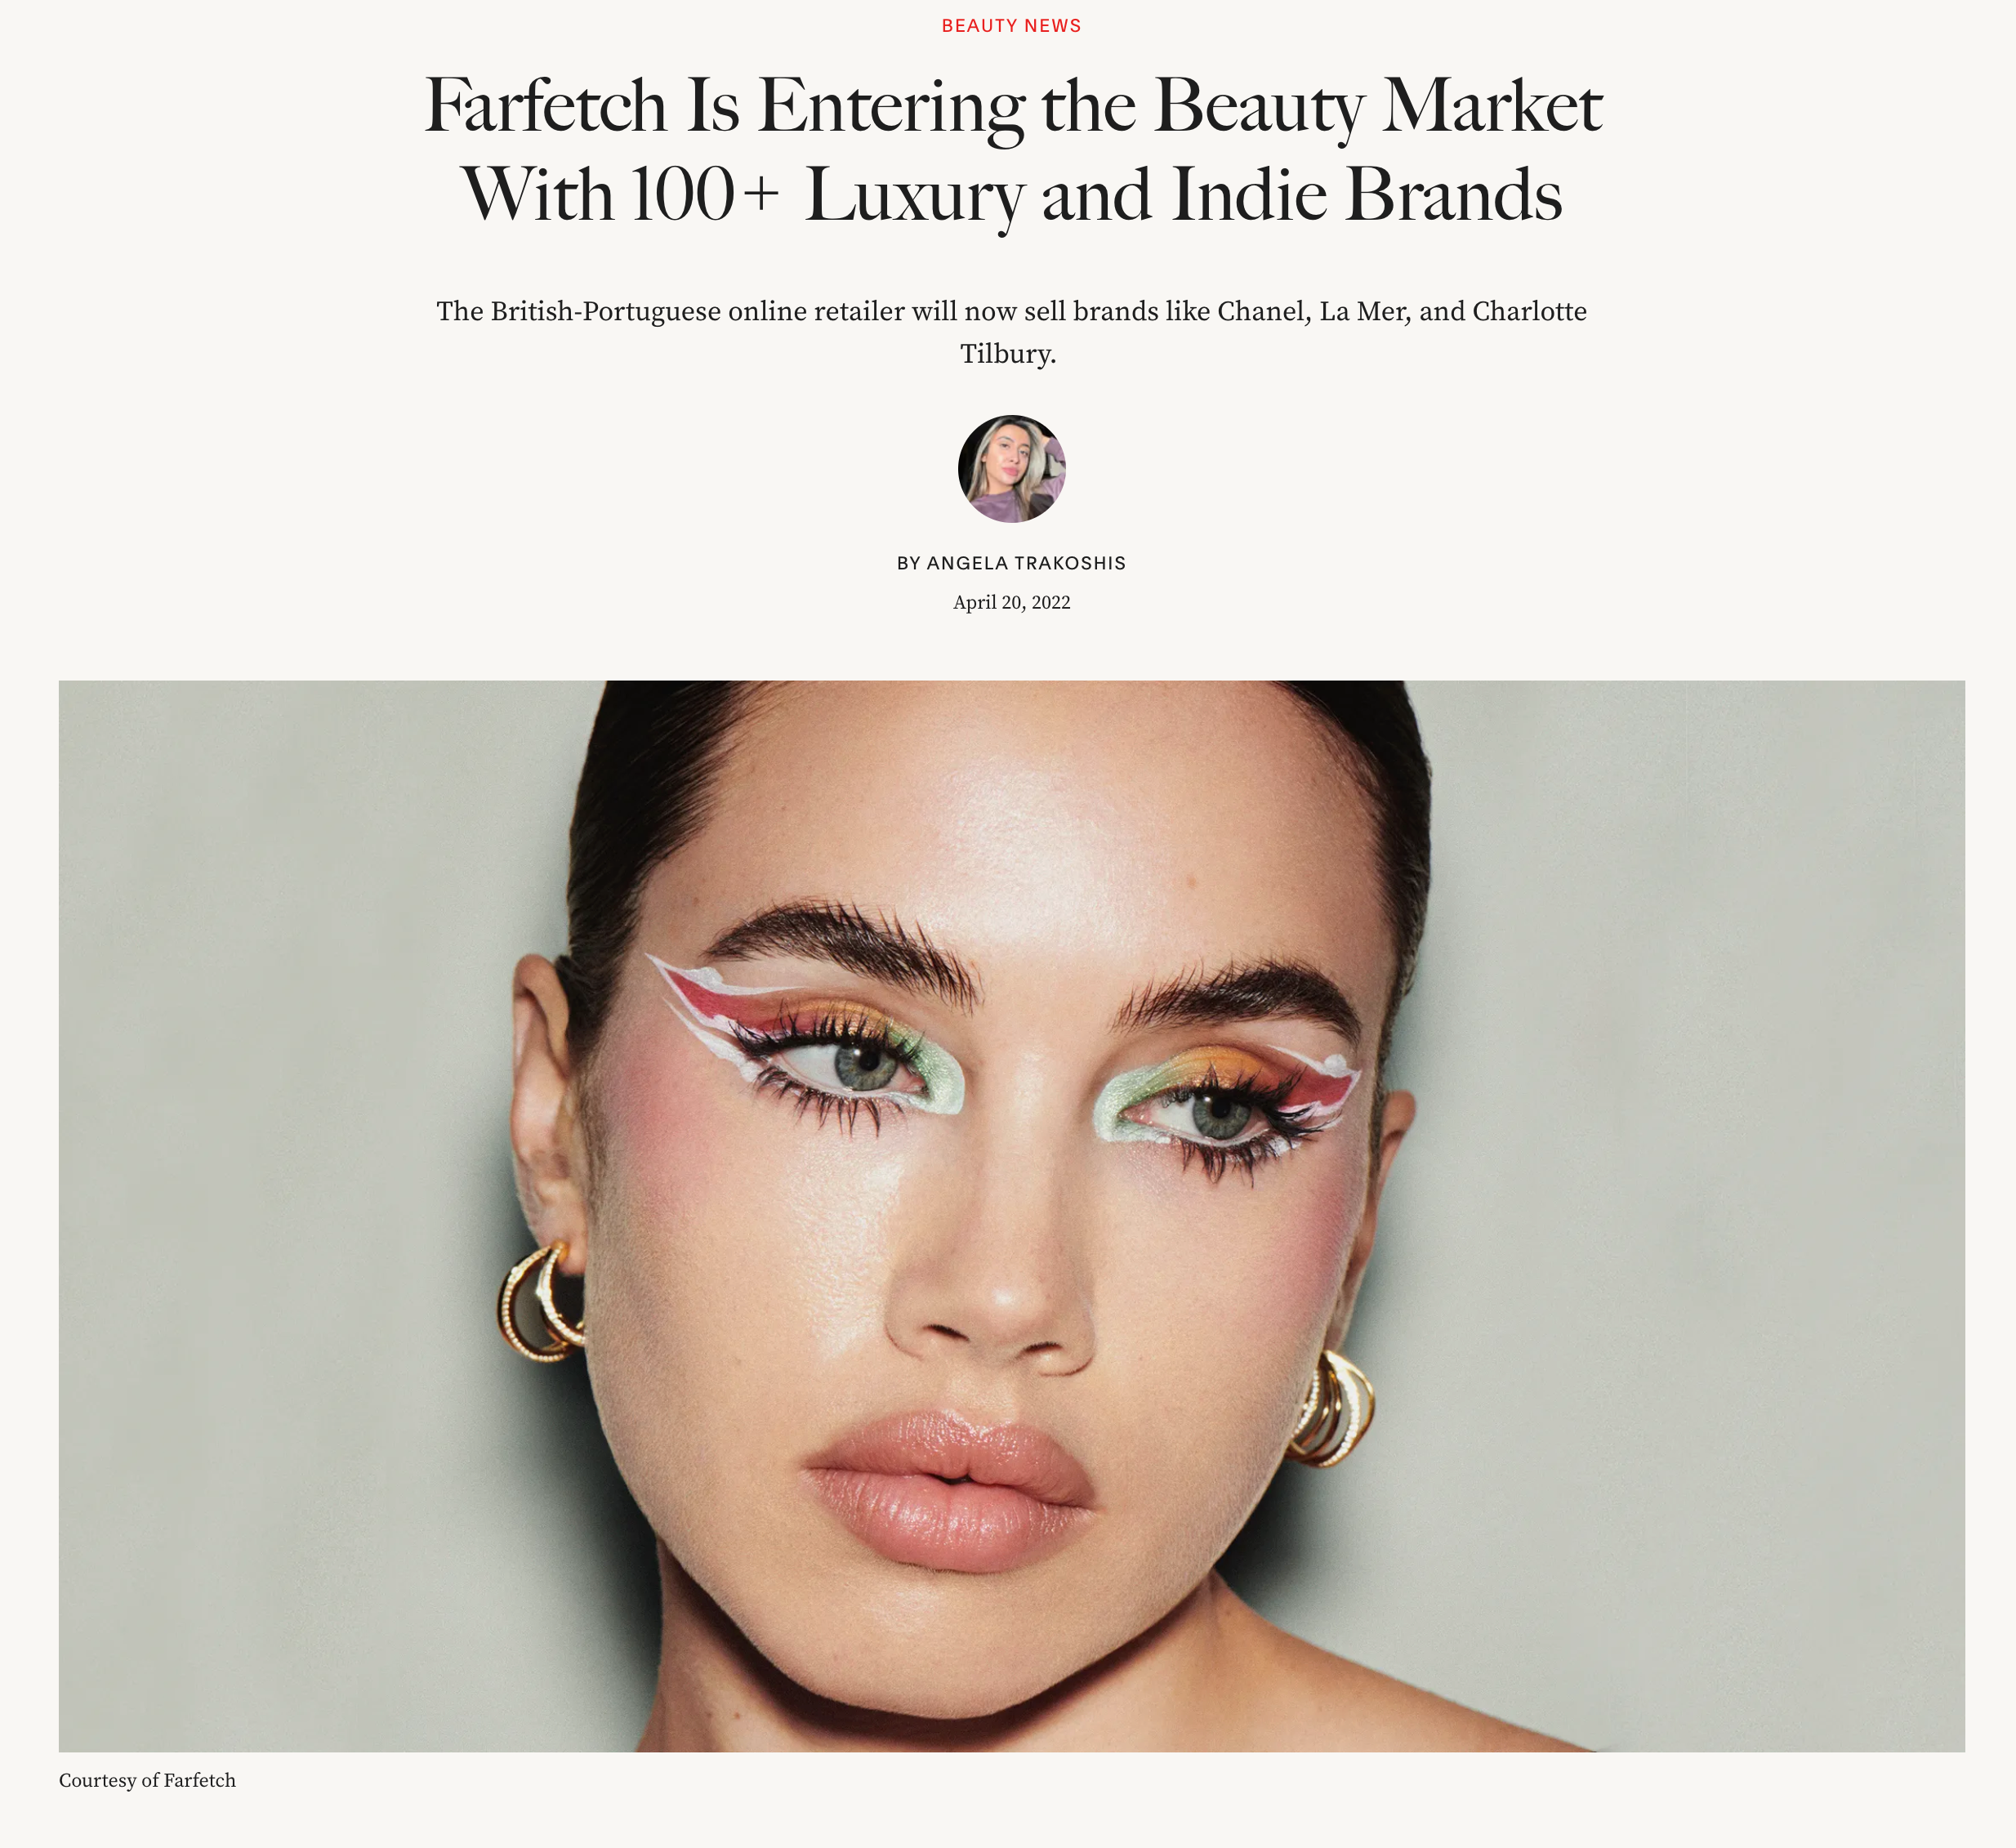 Allure: Farfetch Is Entering the Beauty Market With 100+ Luxury and Indie Brands